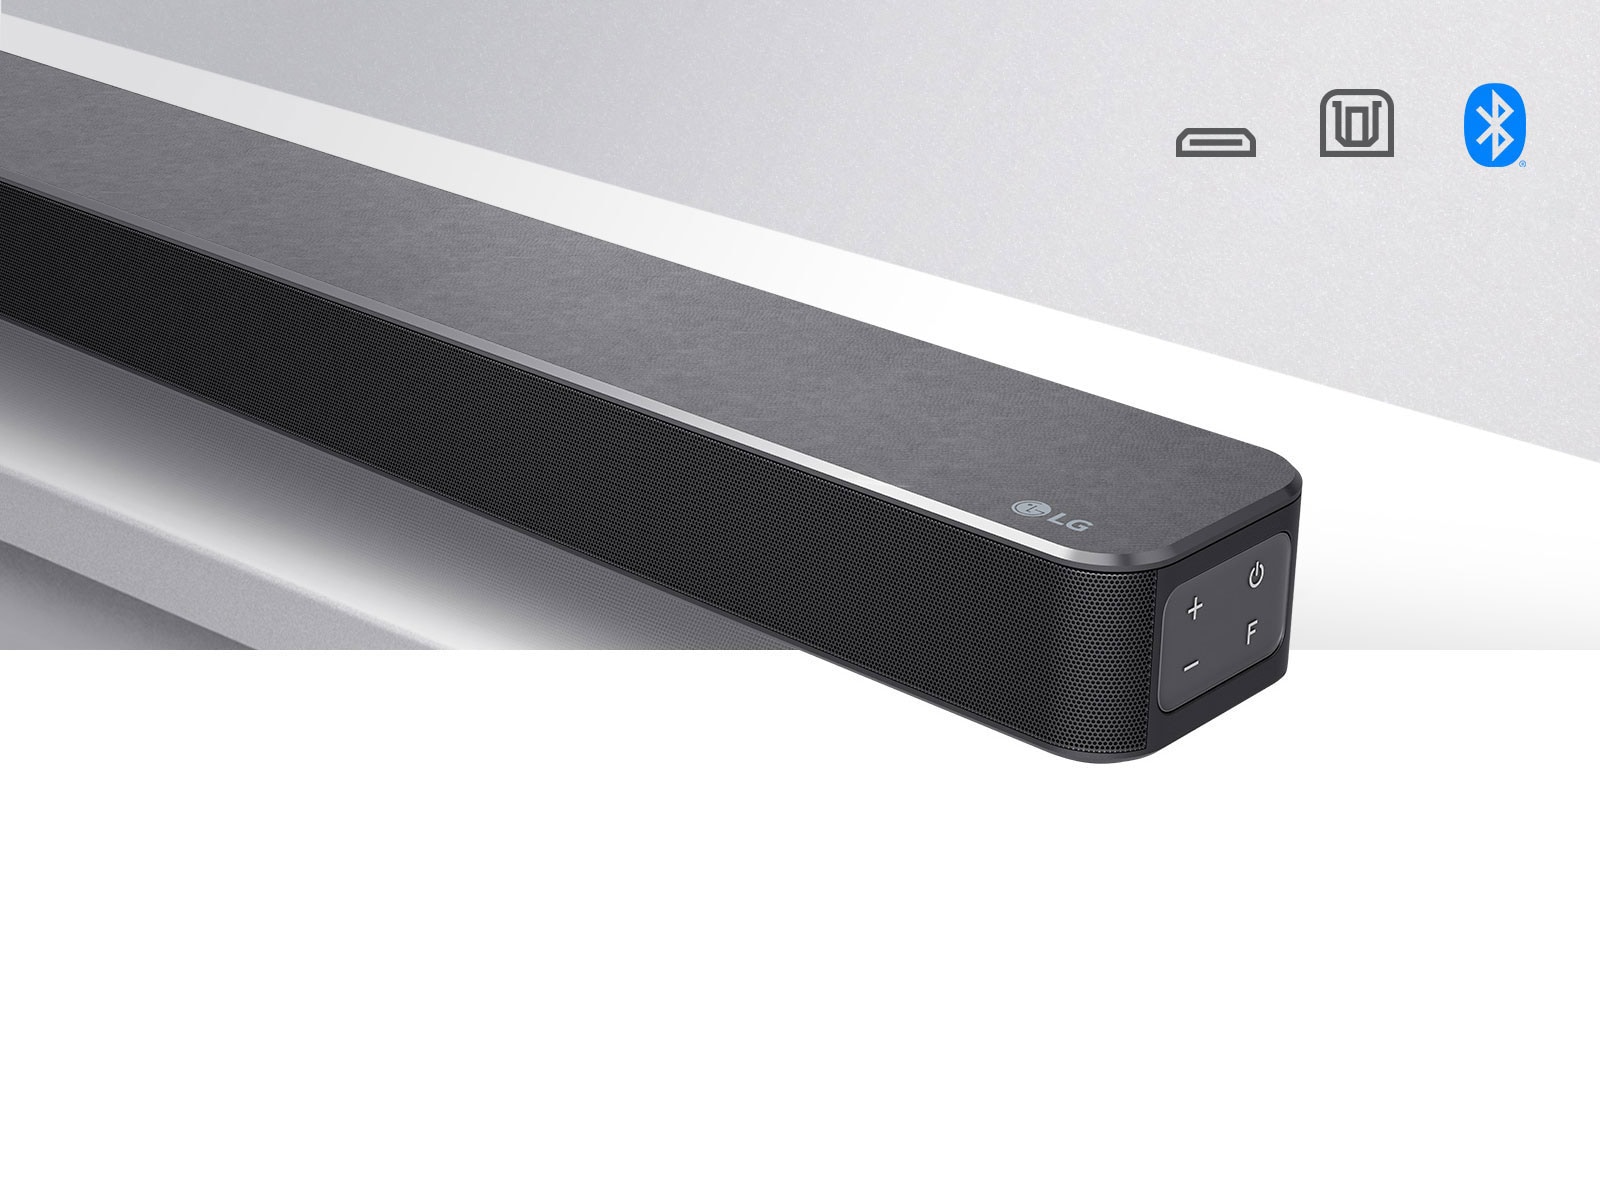 Close-up LG Soundbar right side with LG logo on the bottom right corner. Connectivity icons shown above the product.